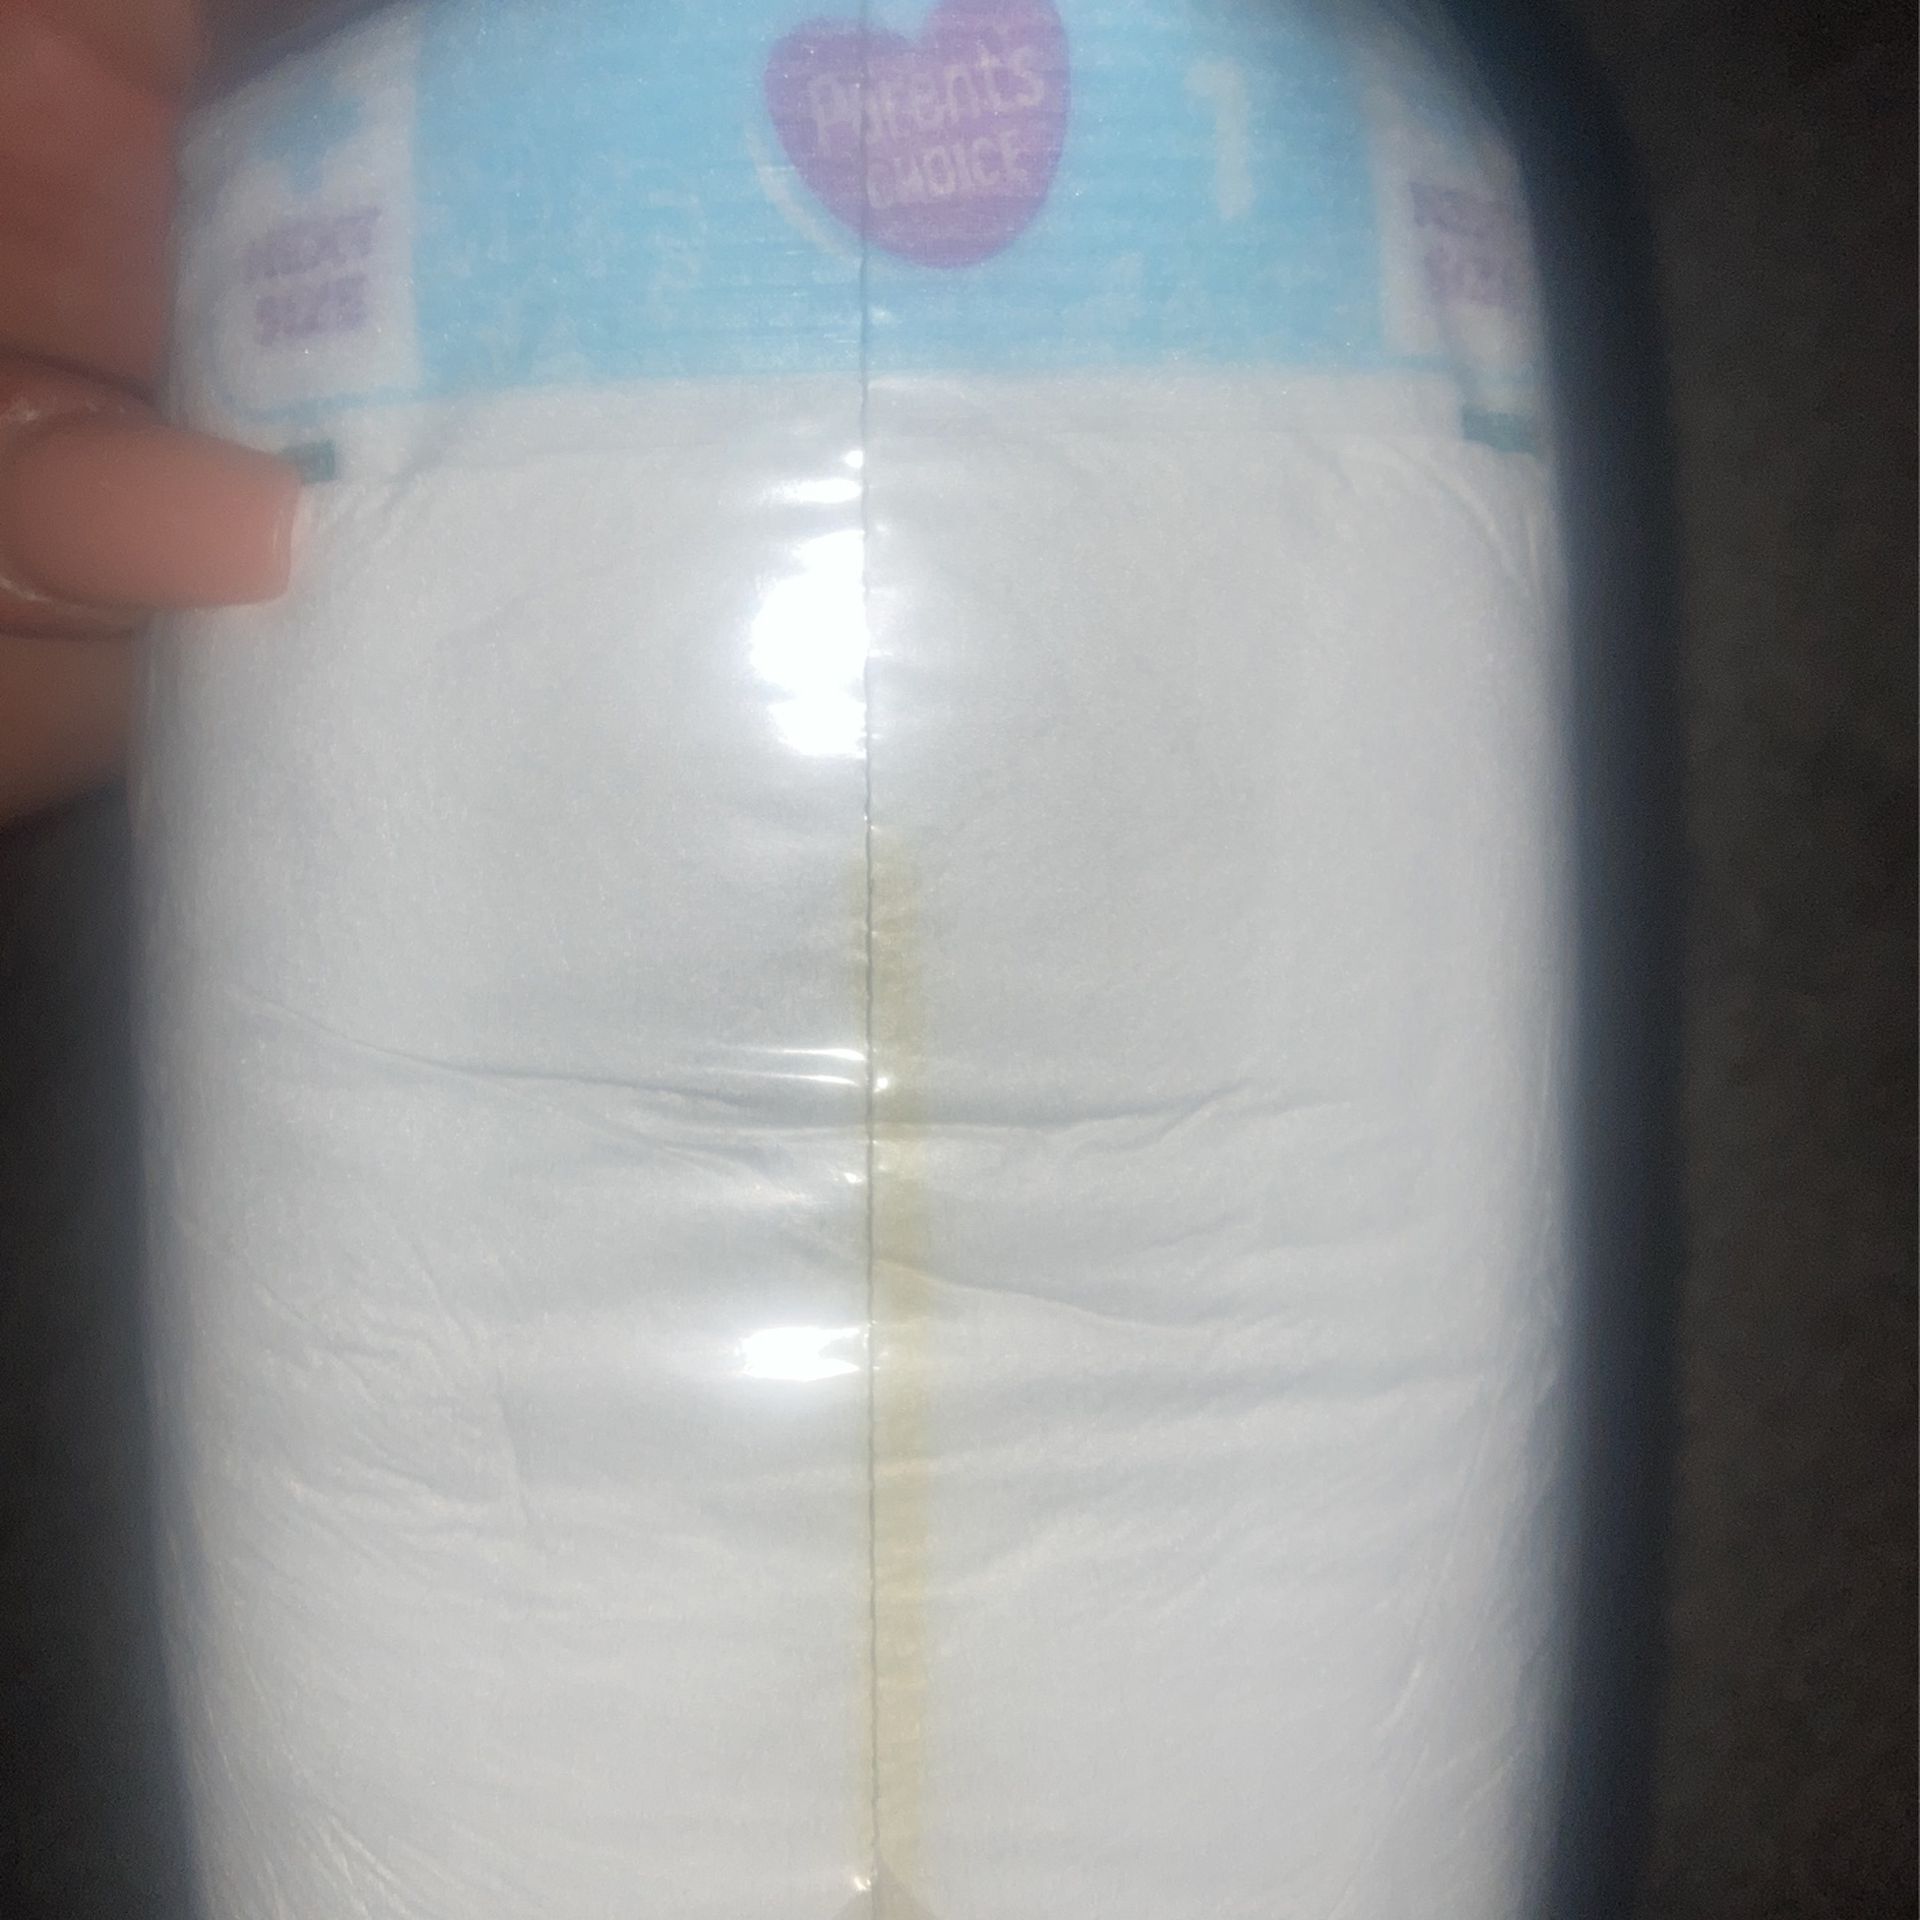 BNIP Size 1 Baby Diapers